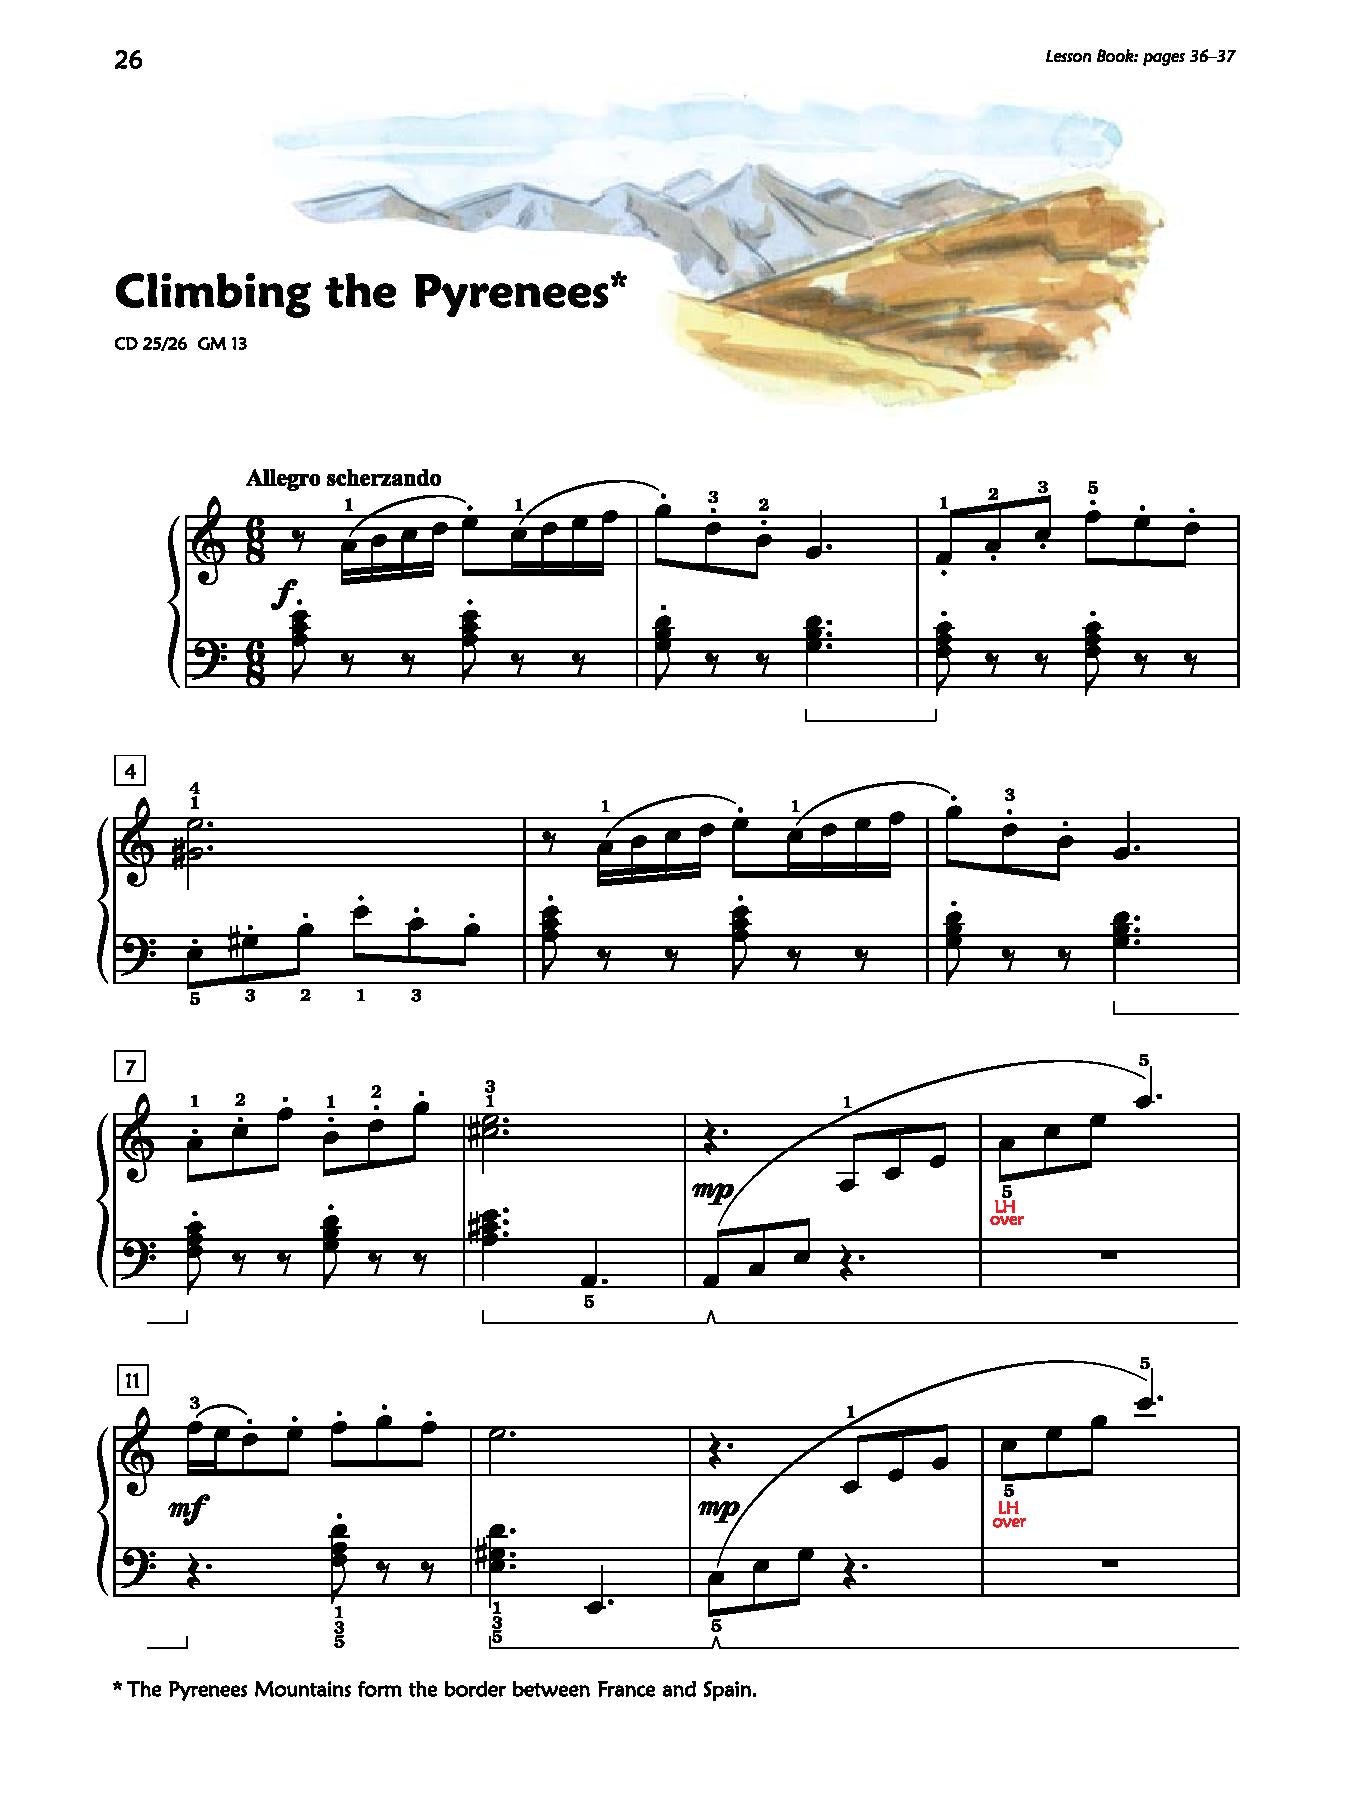 Alfred's Premier Piano Course, Performance 5